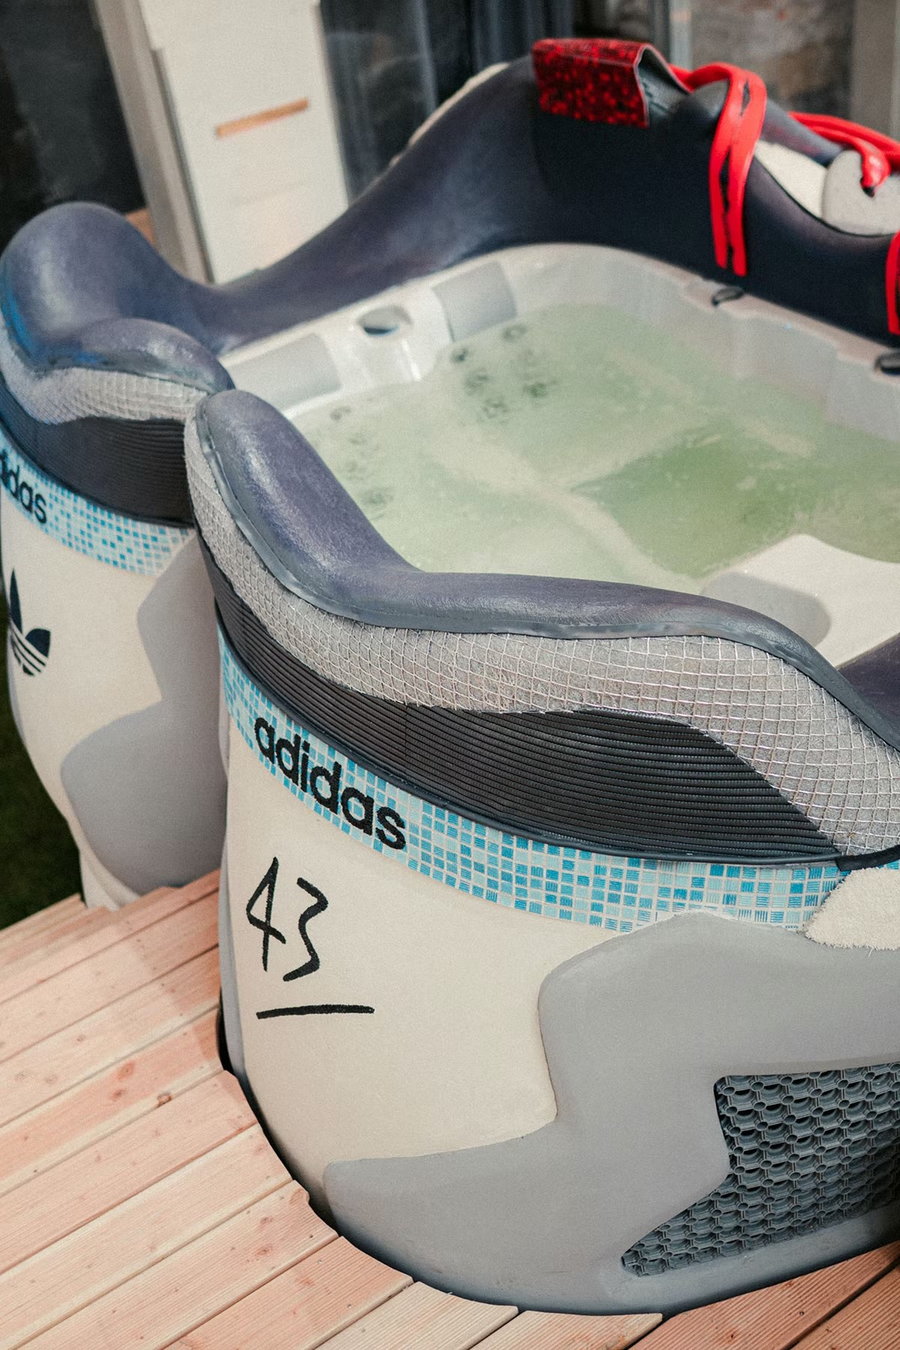 A better look at the hot tub built into the Hornbach Sneaker Pool.